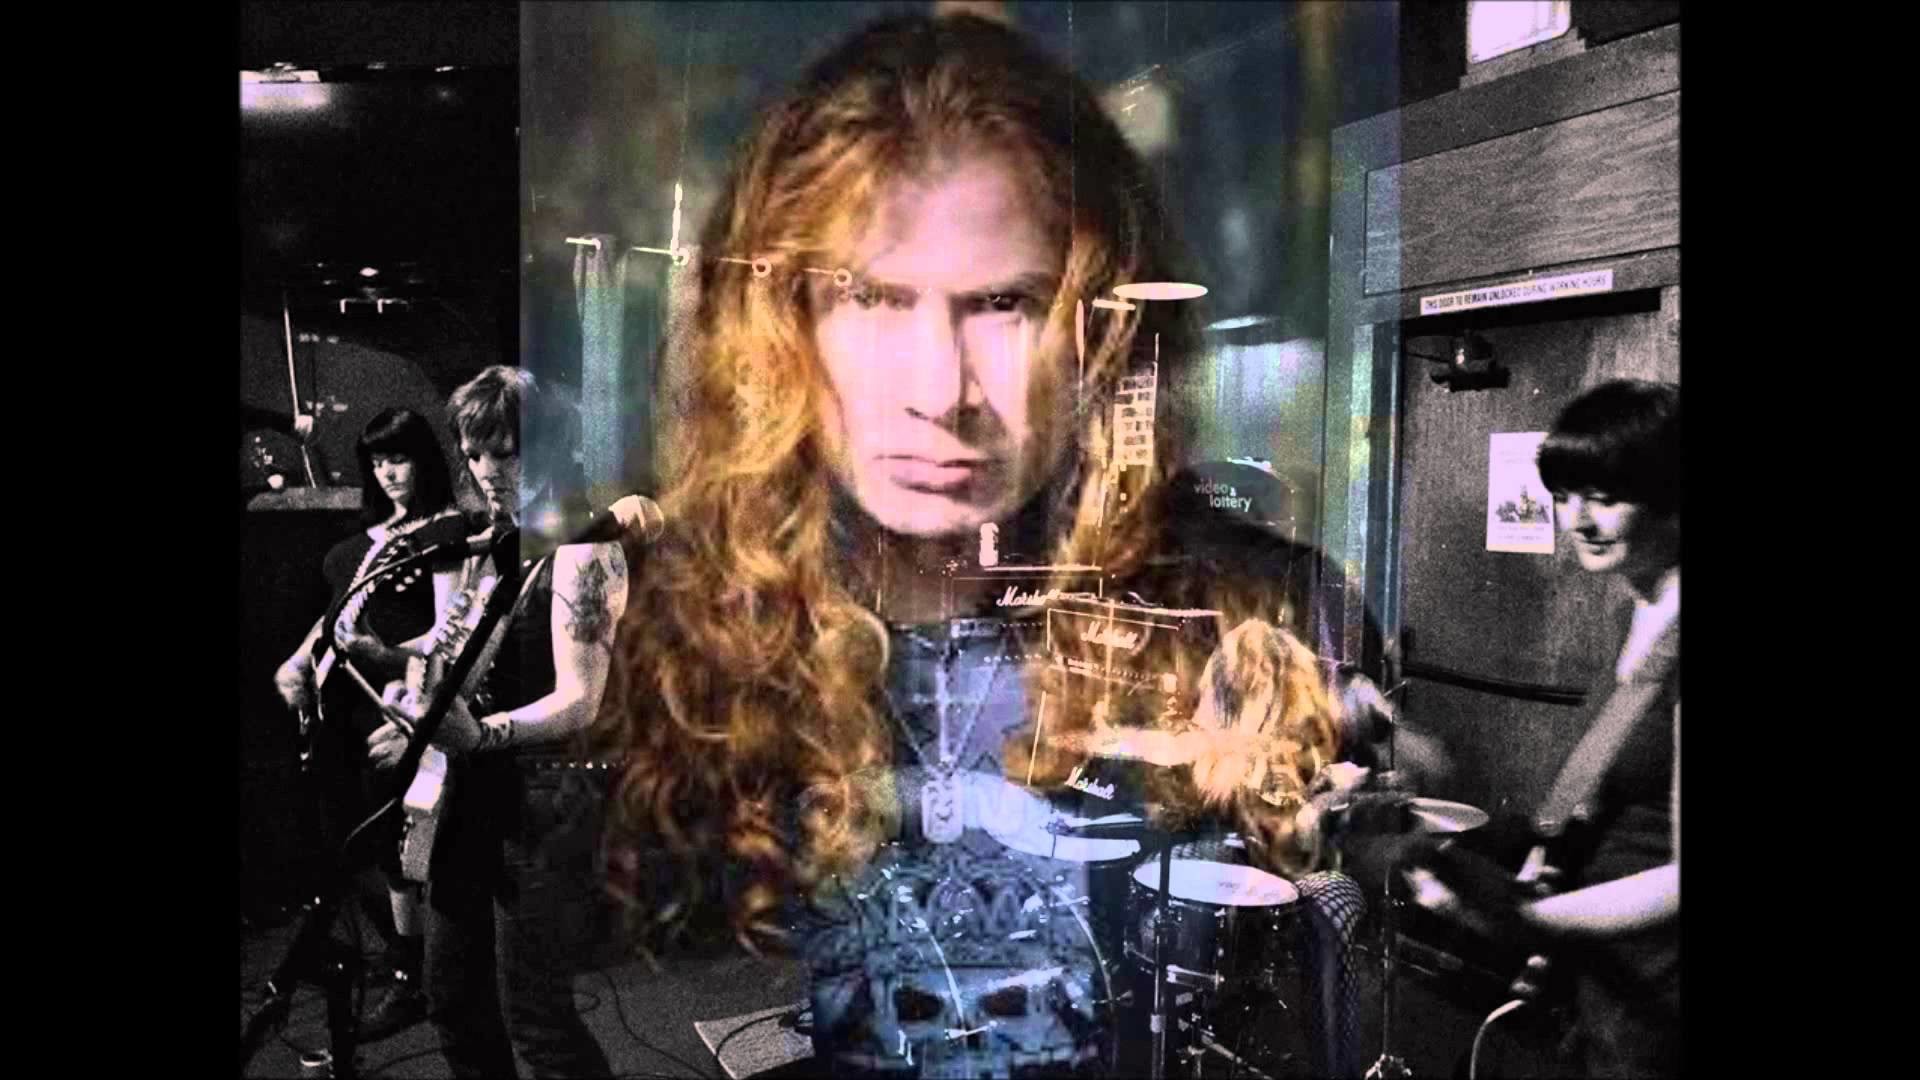 1920x1080 I Got Dissed by Dave Mustaine - Bitch School Video